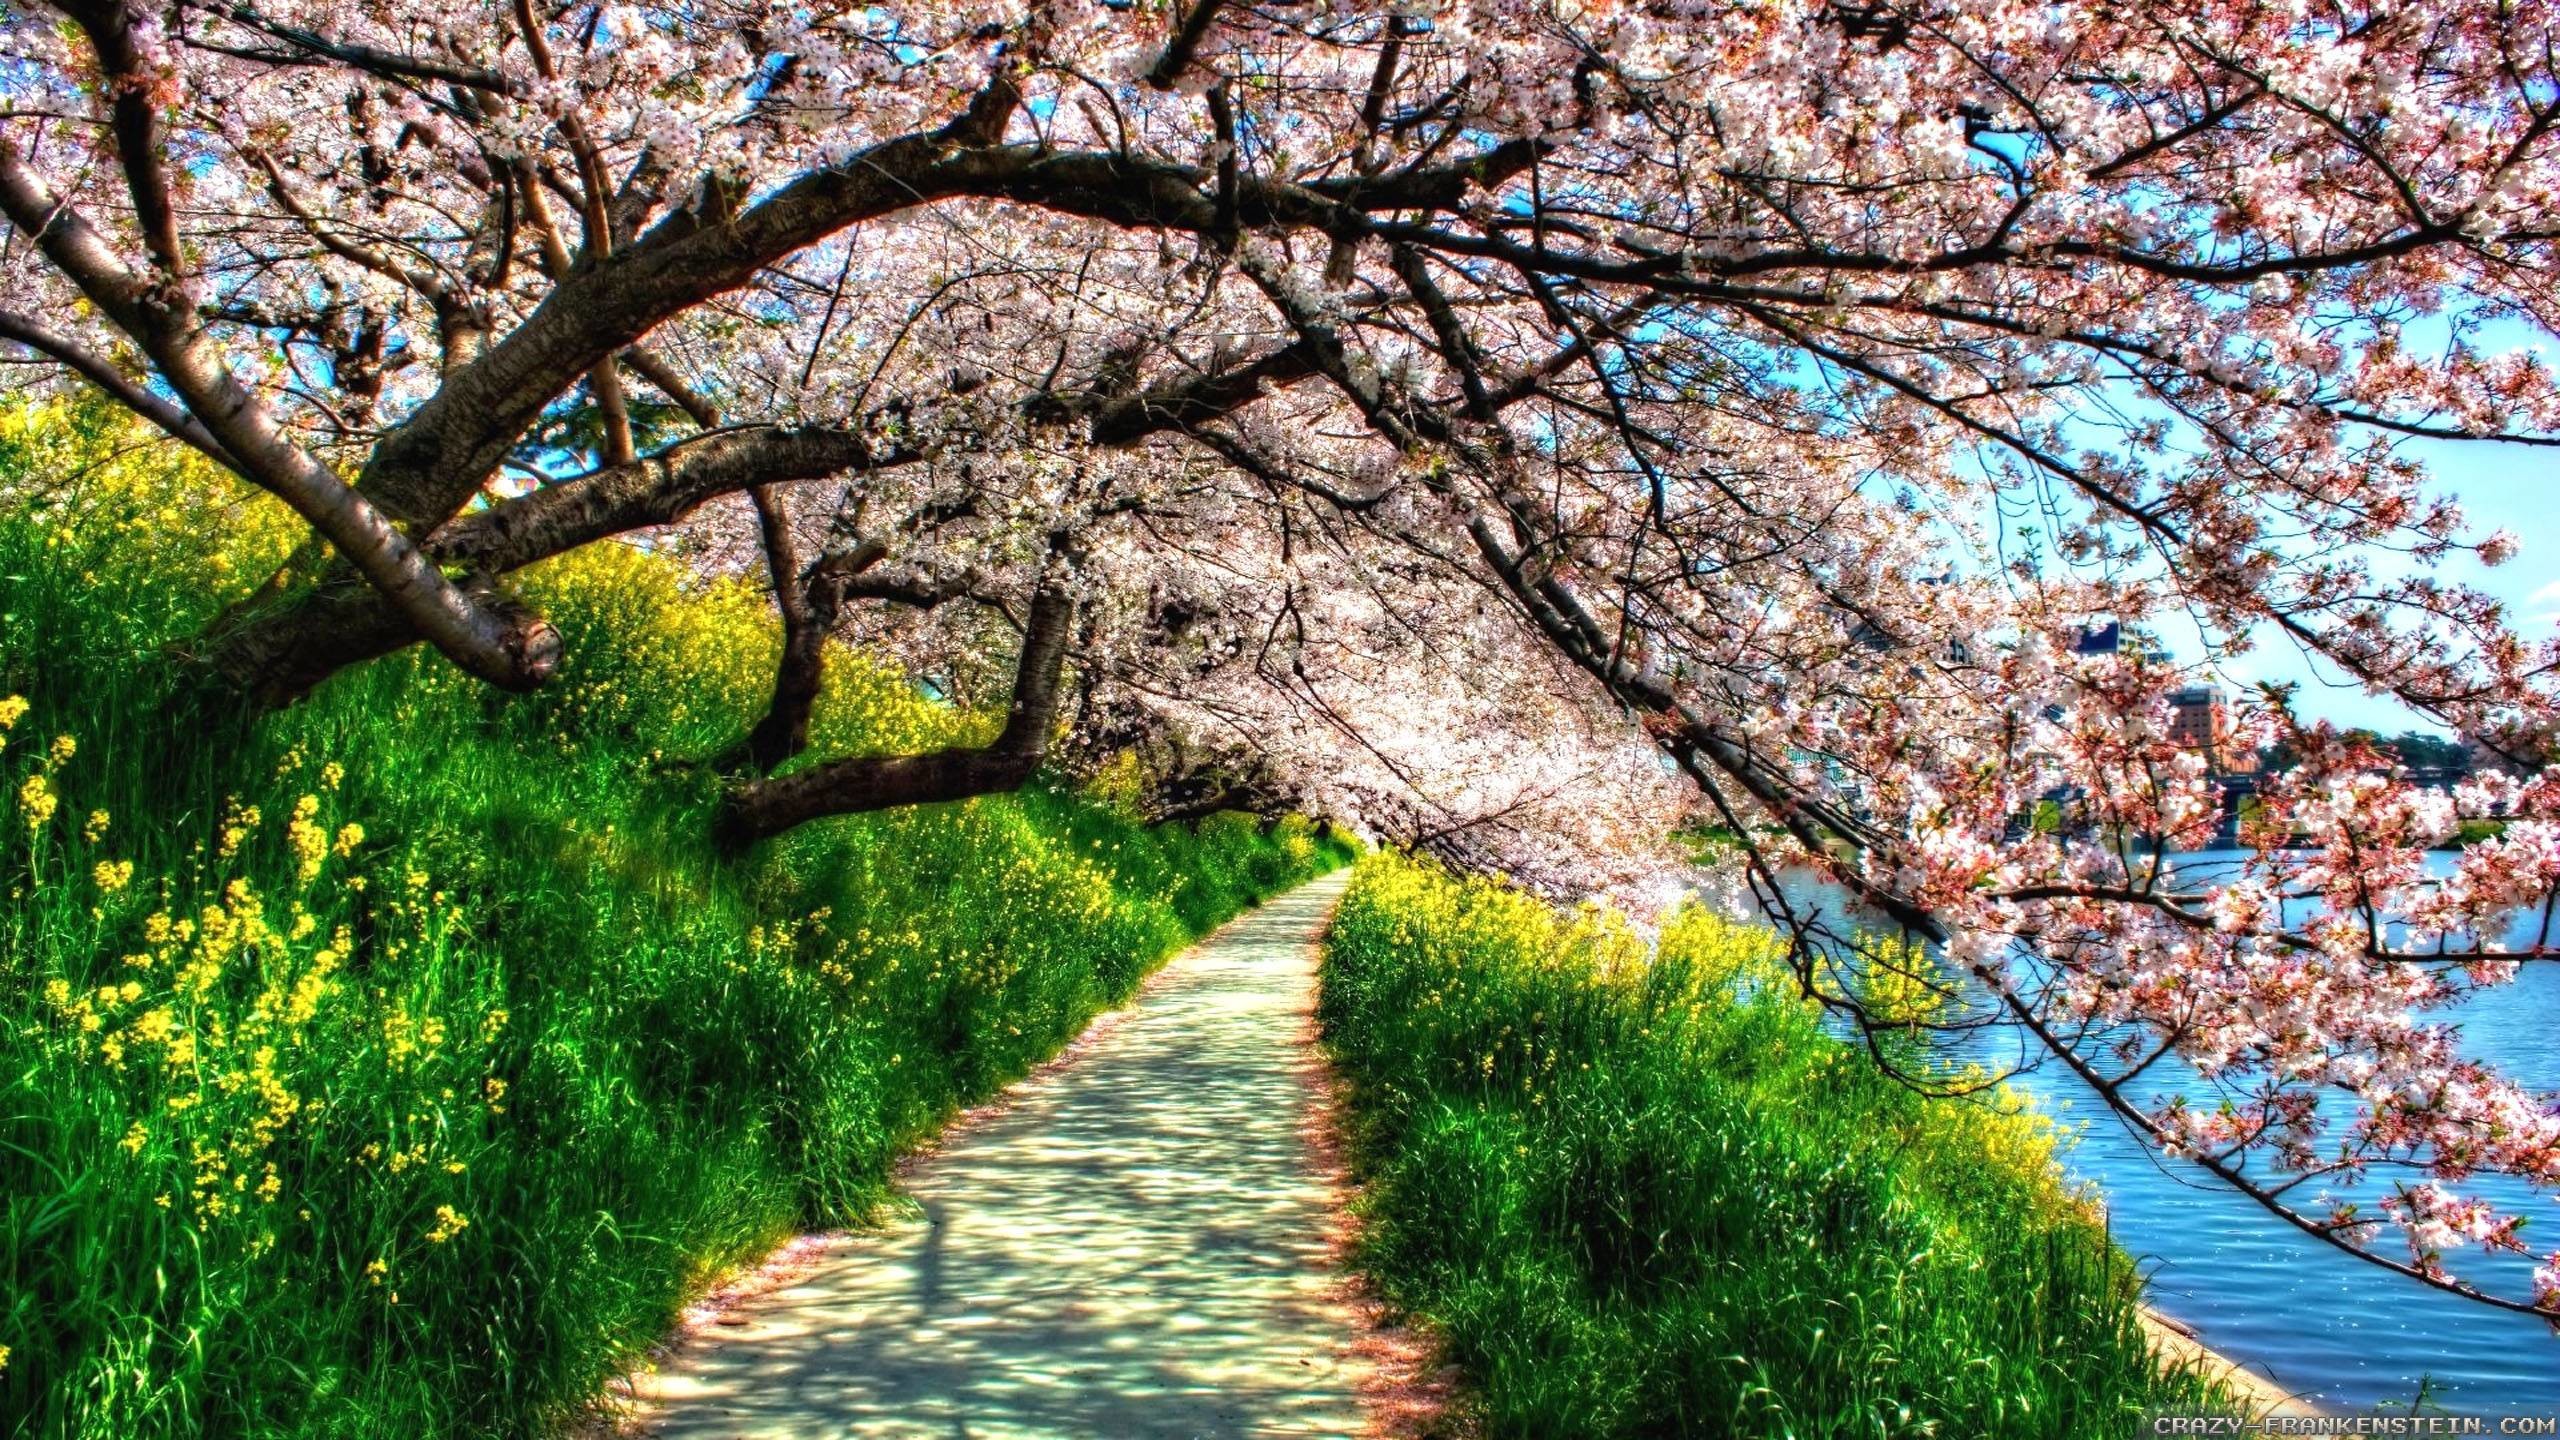 2560x1440 Spring Nature Photo Images 6 HD Wallpapers | Hdimges.